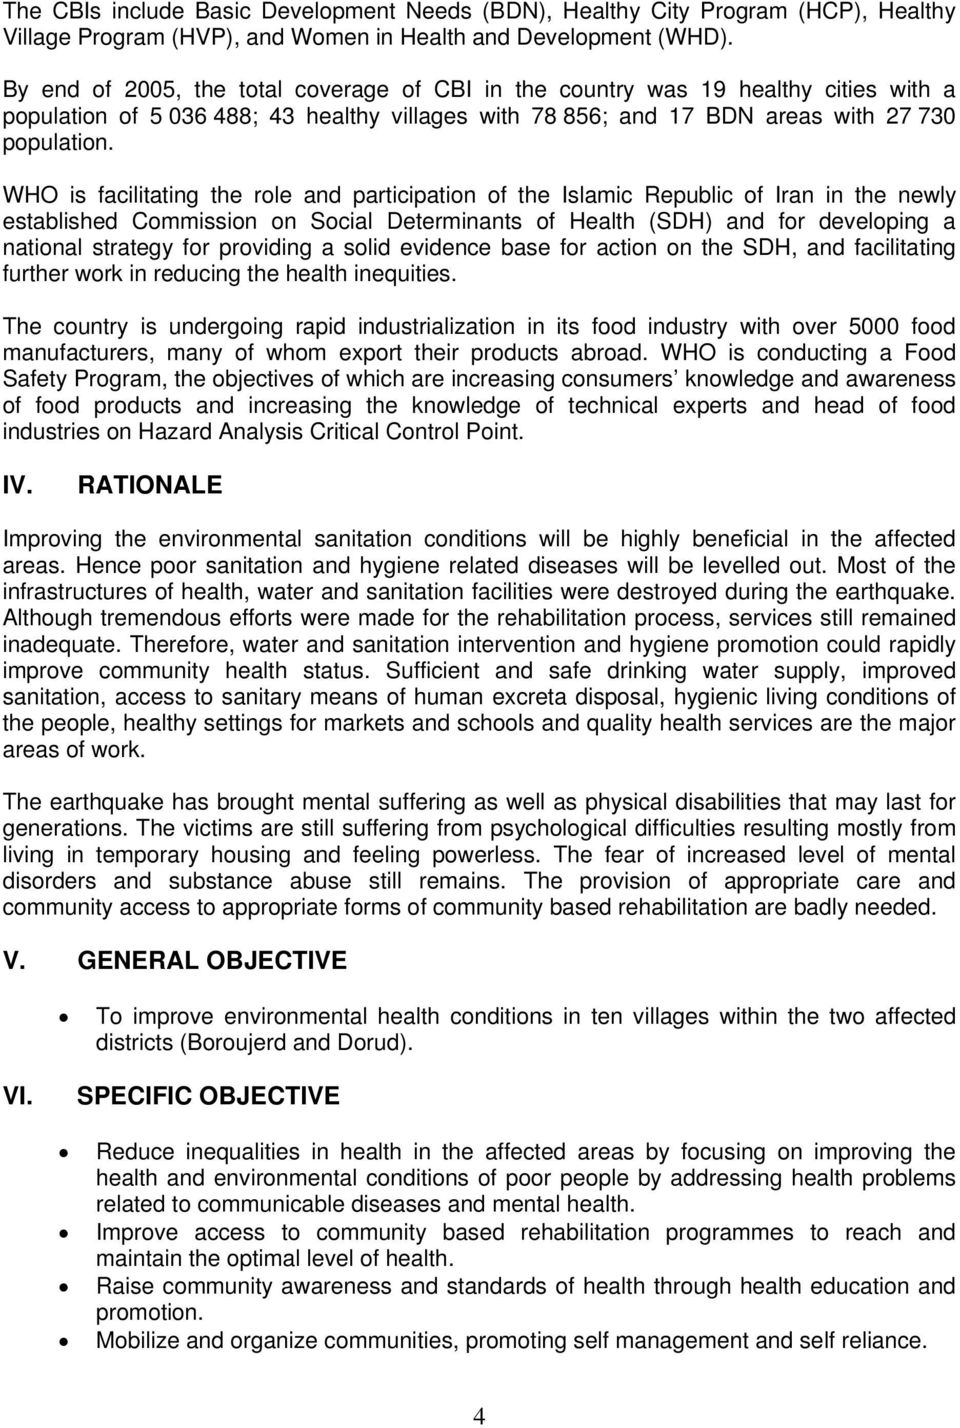 WHO is facilitating the role and participation of the Islamic Republic of Iran in the newly established Commission on Social Determinants of Health (SDH) and for developing a national strategy for